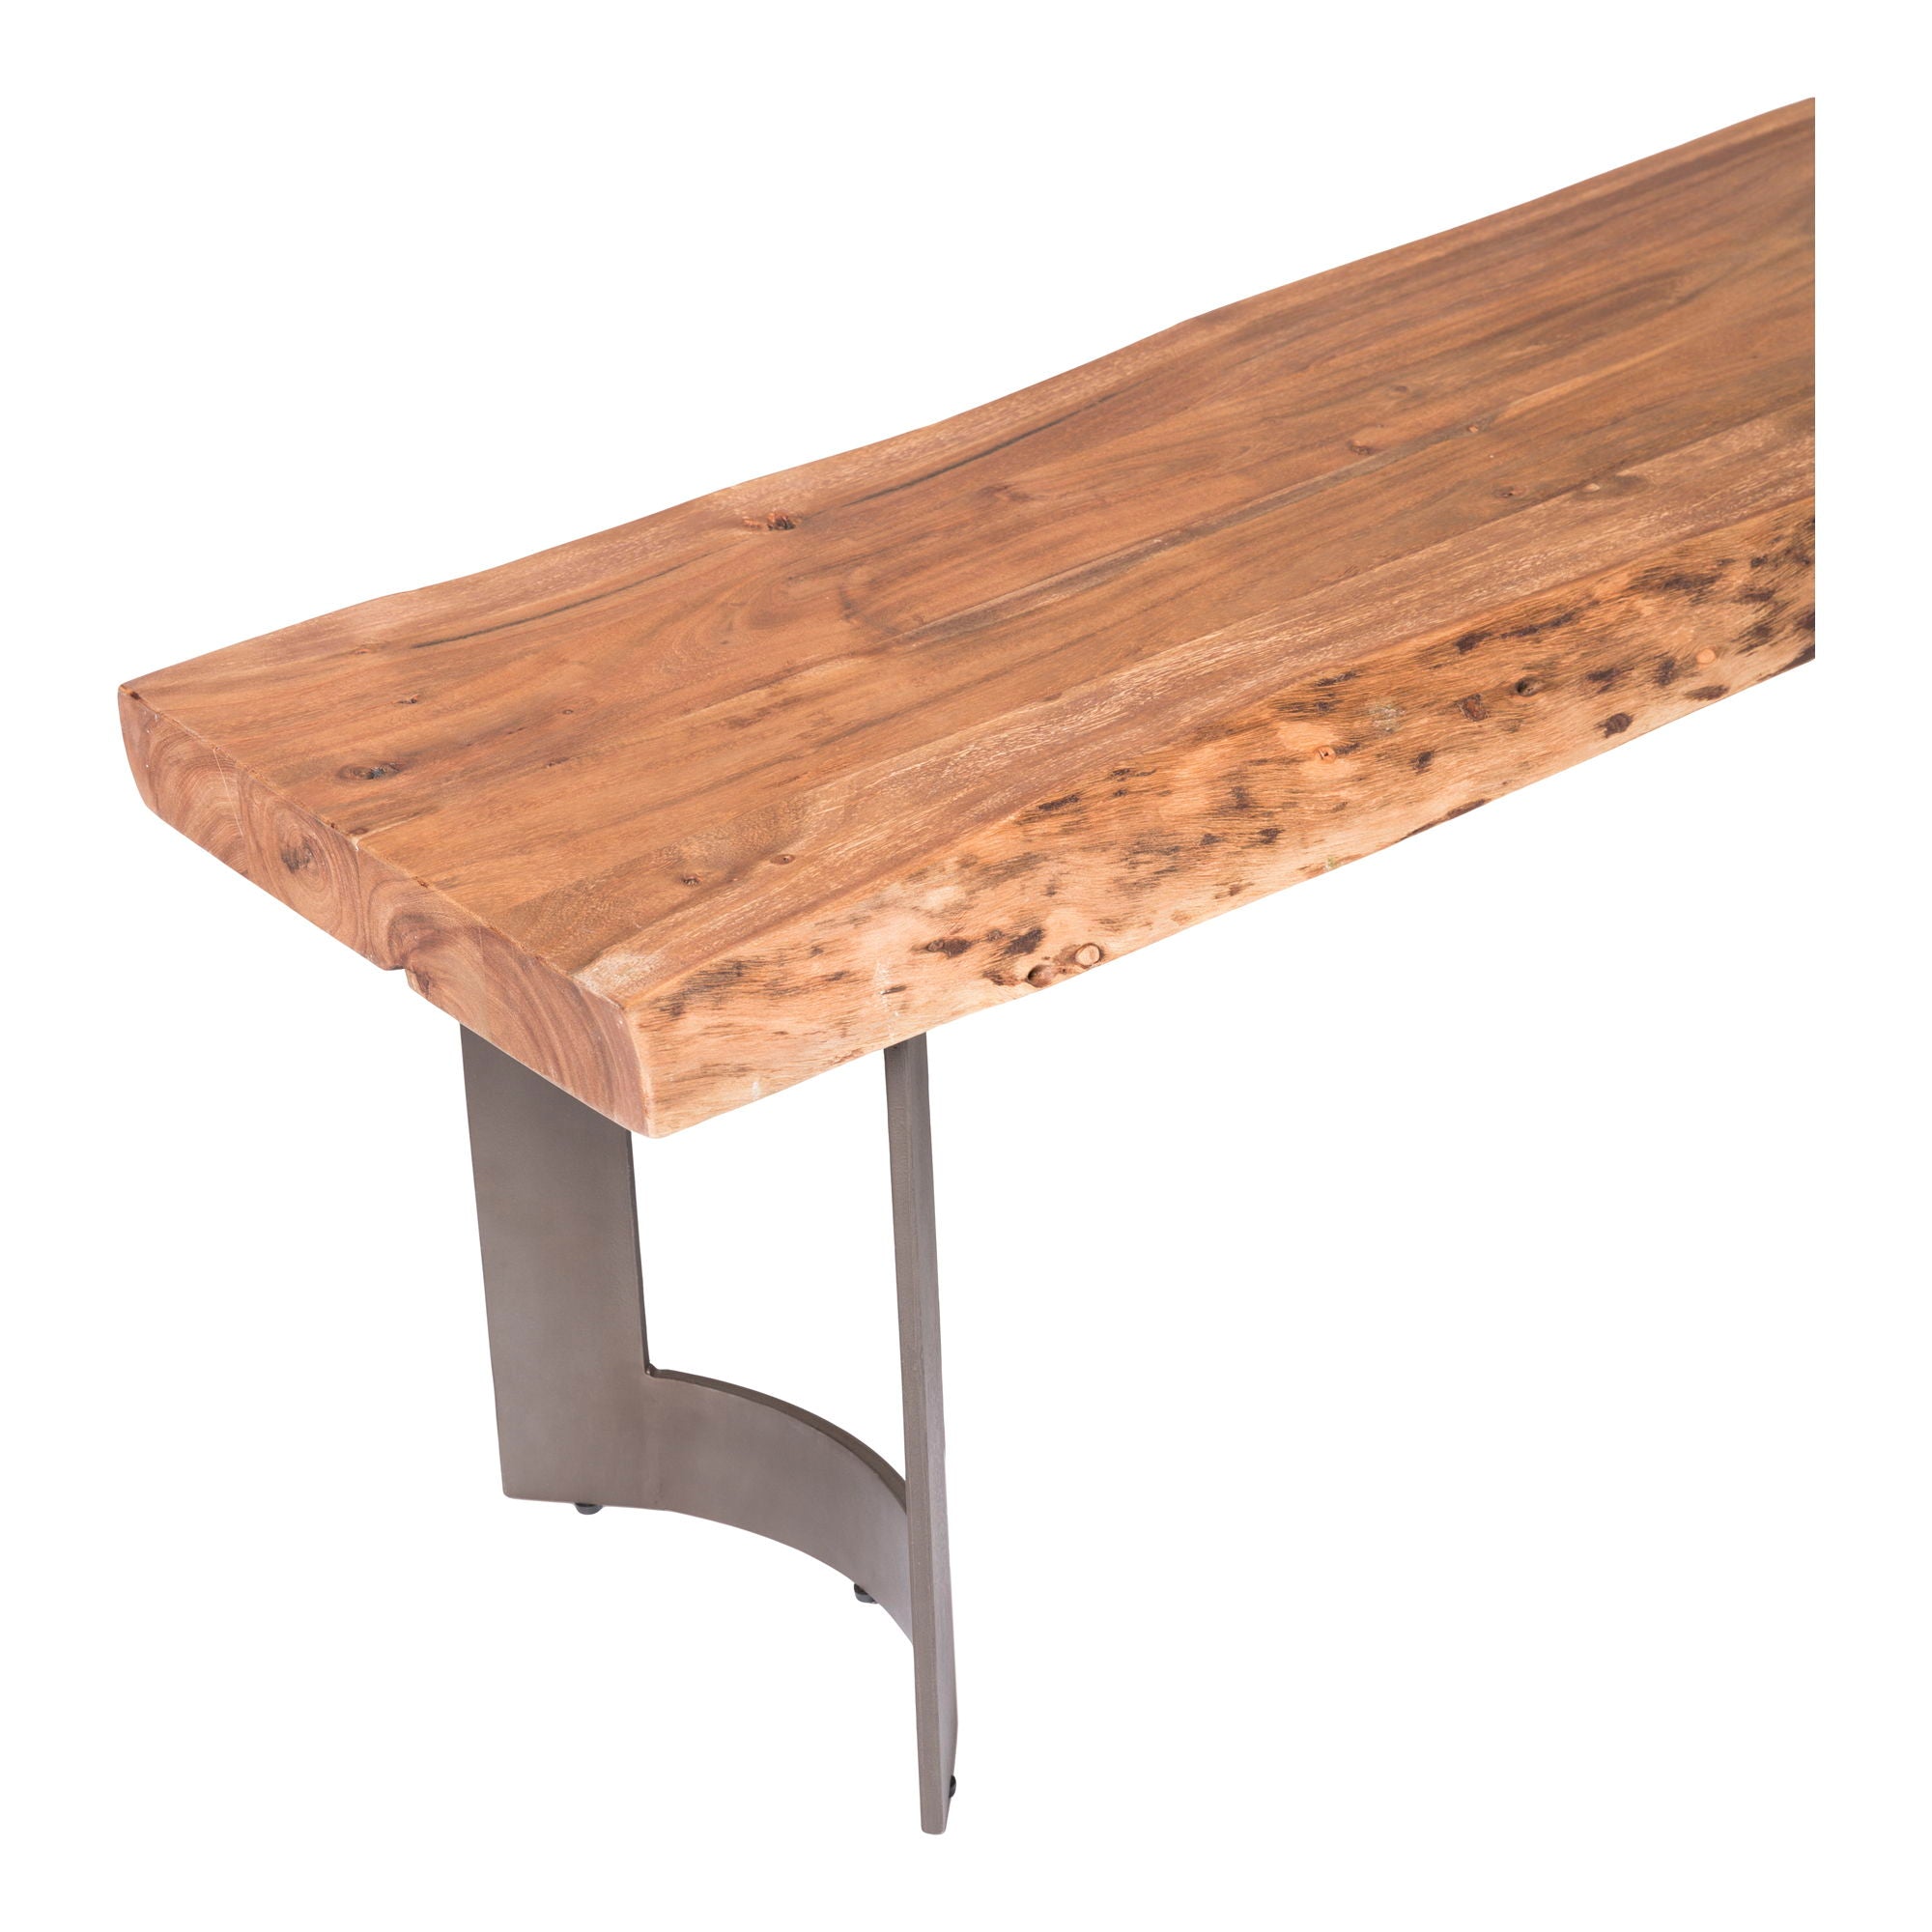 Bent - Bench Large - Natural Stain